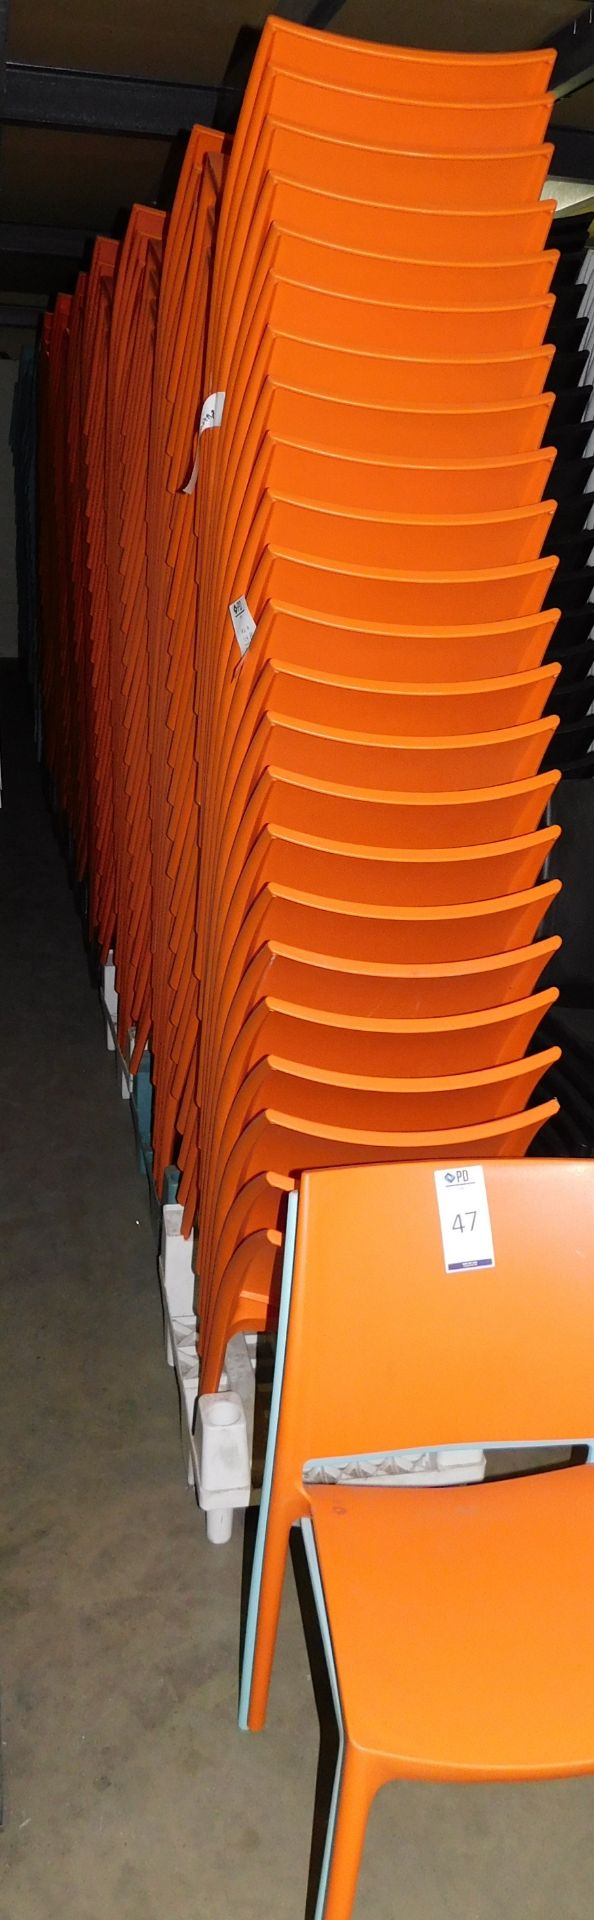 270 Stax Chairs, (160 Orange & 110 Blue) (Located Huntingdon, See General Notes for More Details) - Image 3 of 4